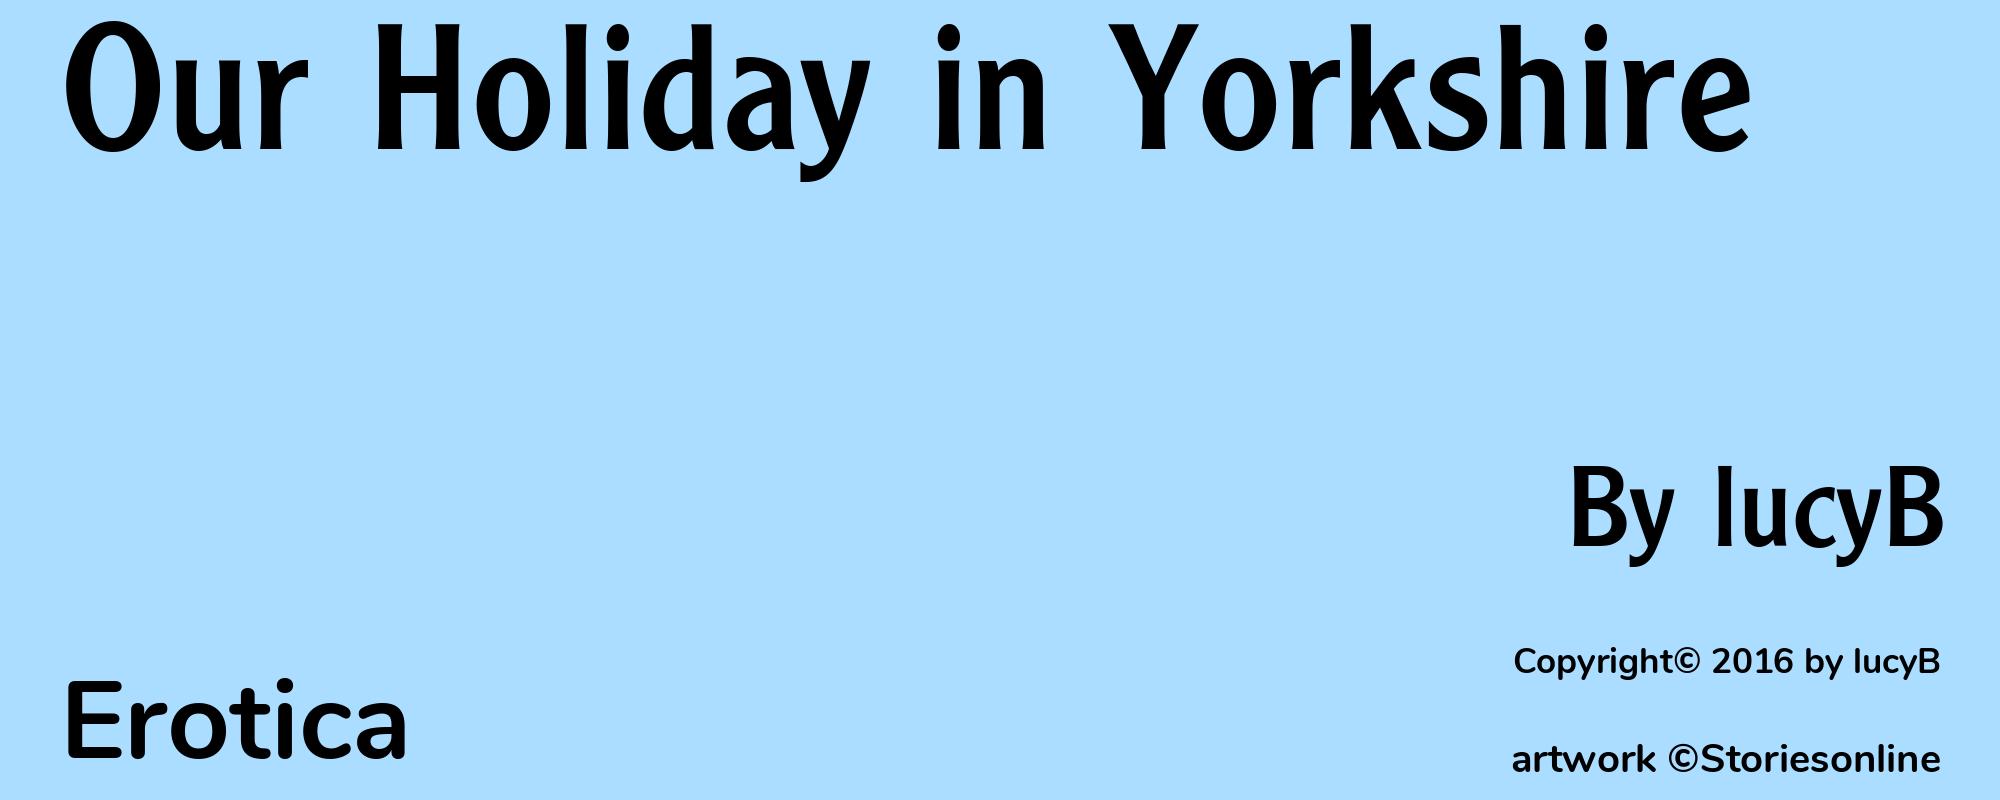 Our Holiday in Yorkshire - Cover